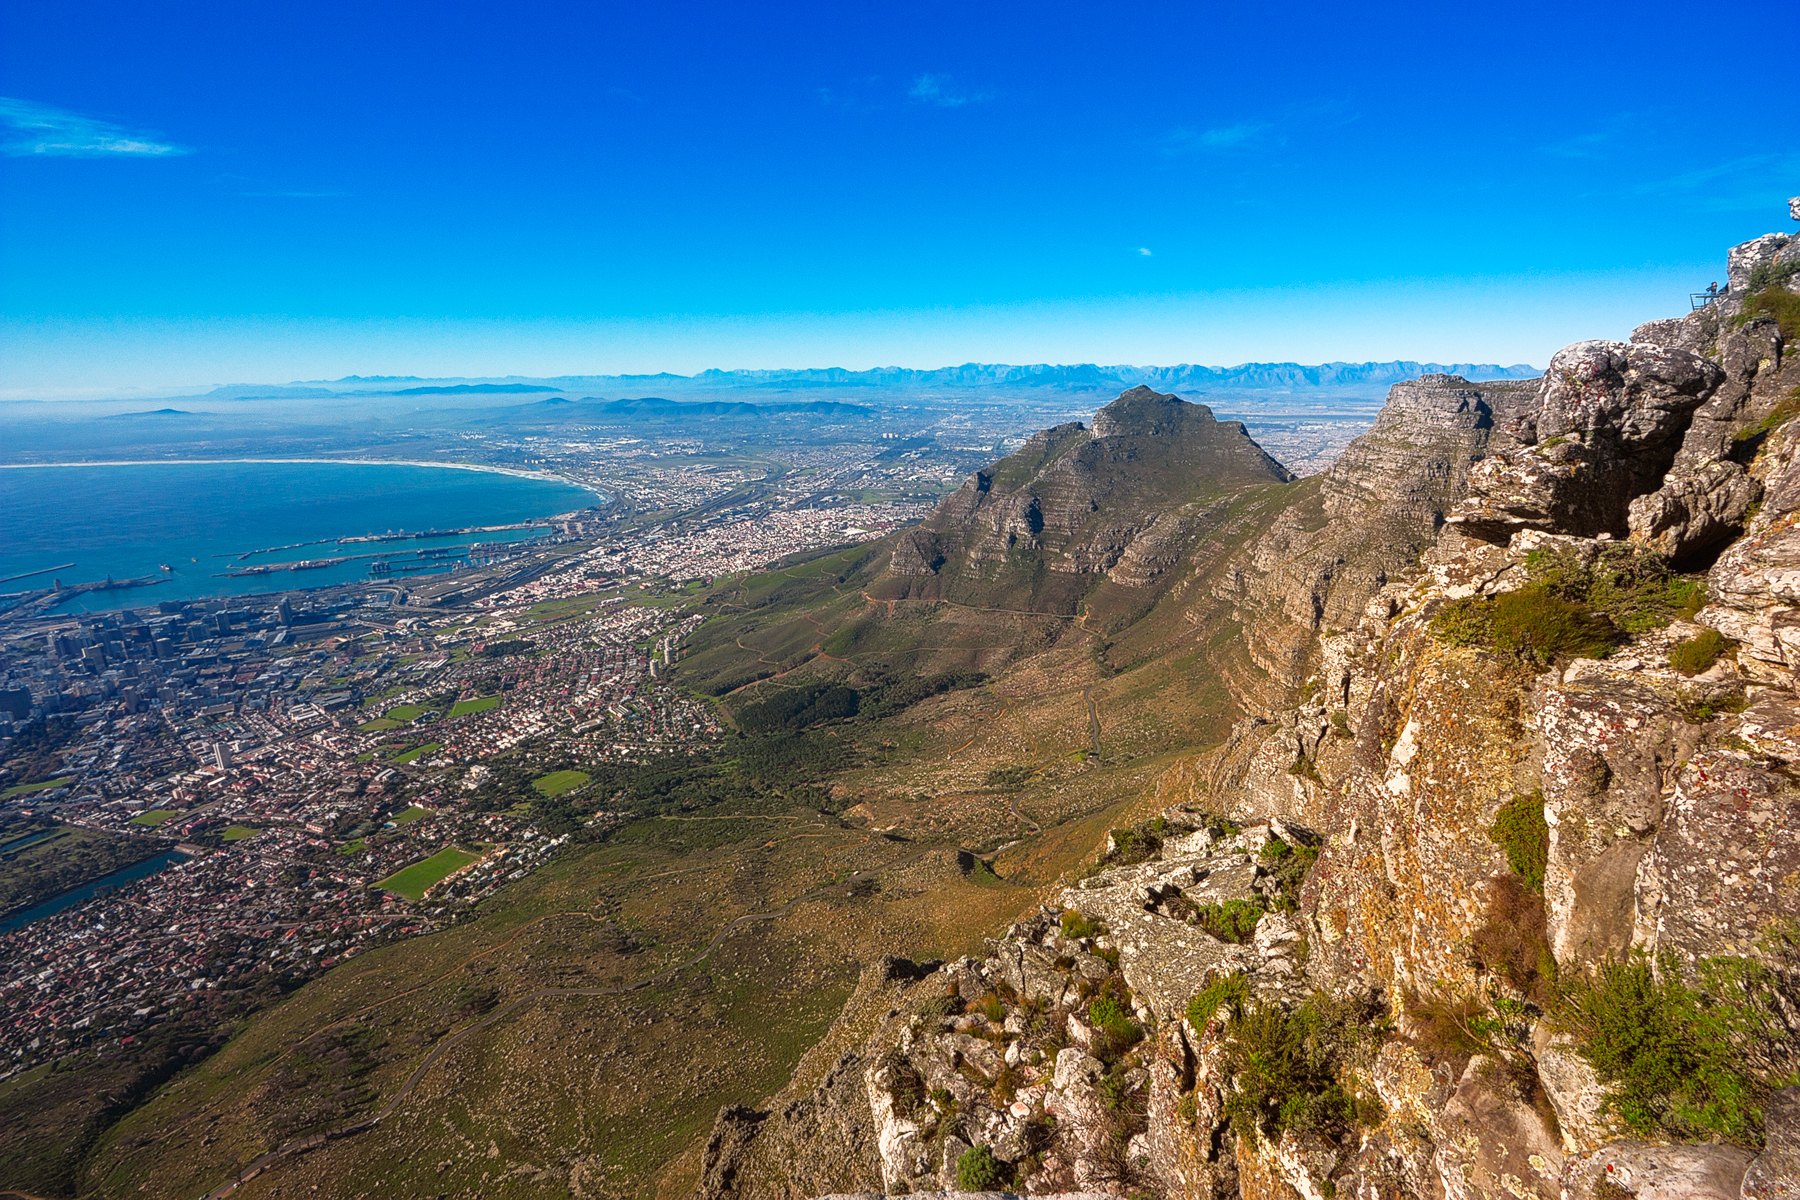 Cape town overview - hdr photo